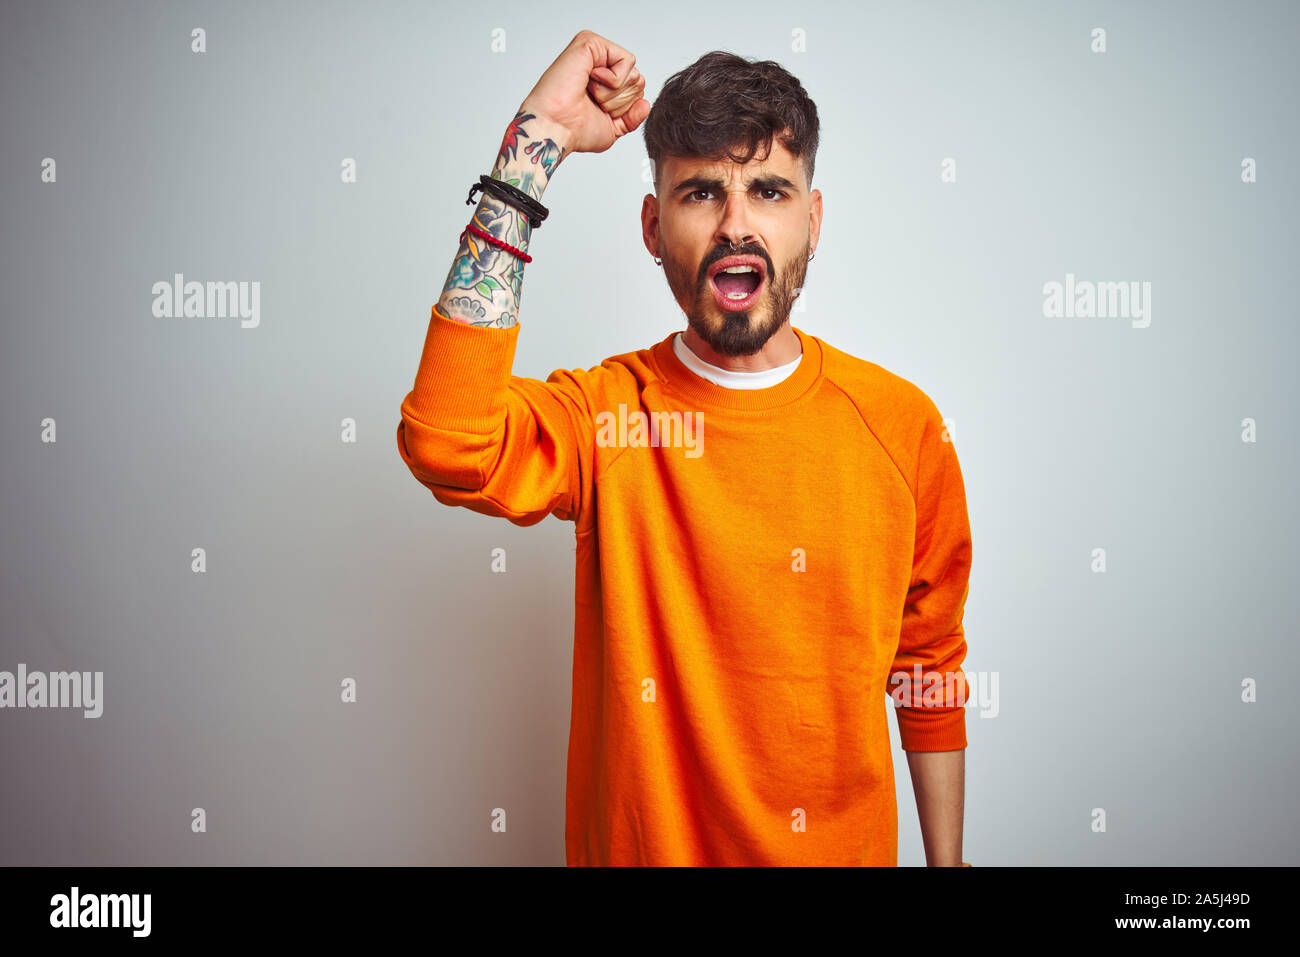 Young man with tattoo wearing orange sweater standing over isolated white background angry and mad raising fist frustrated and furious while shouting Stock Photo